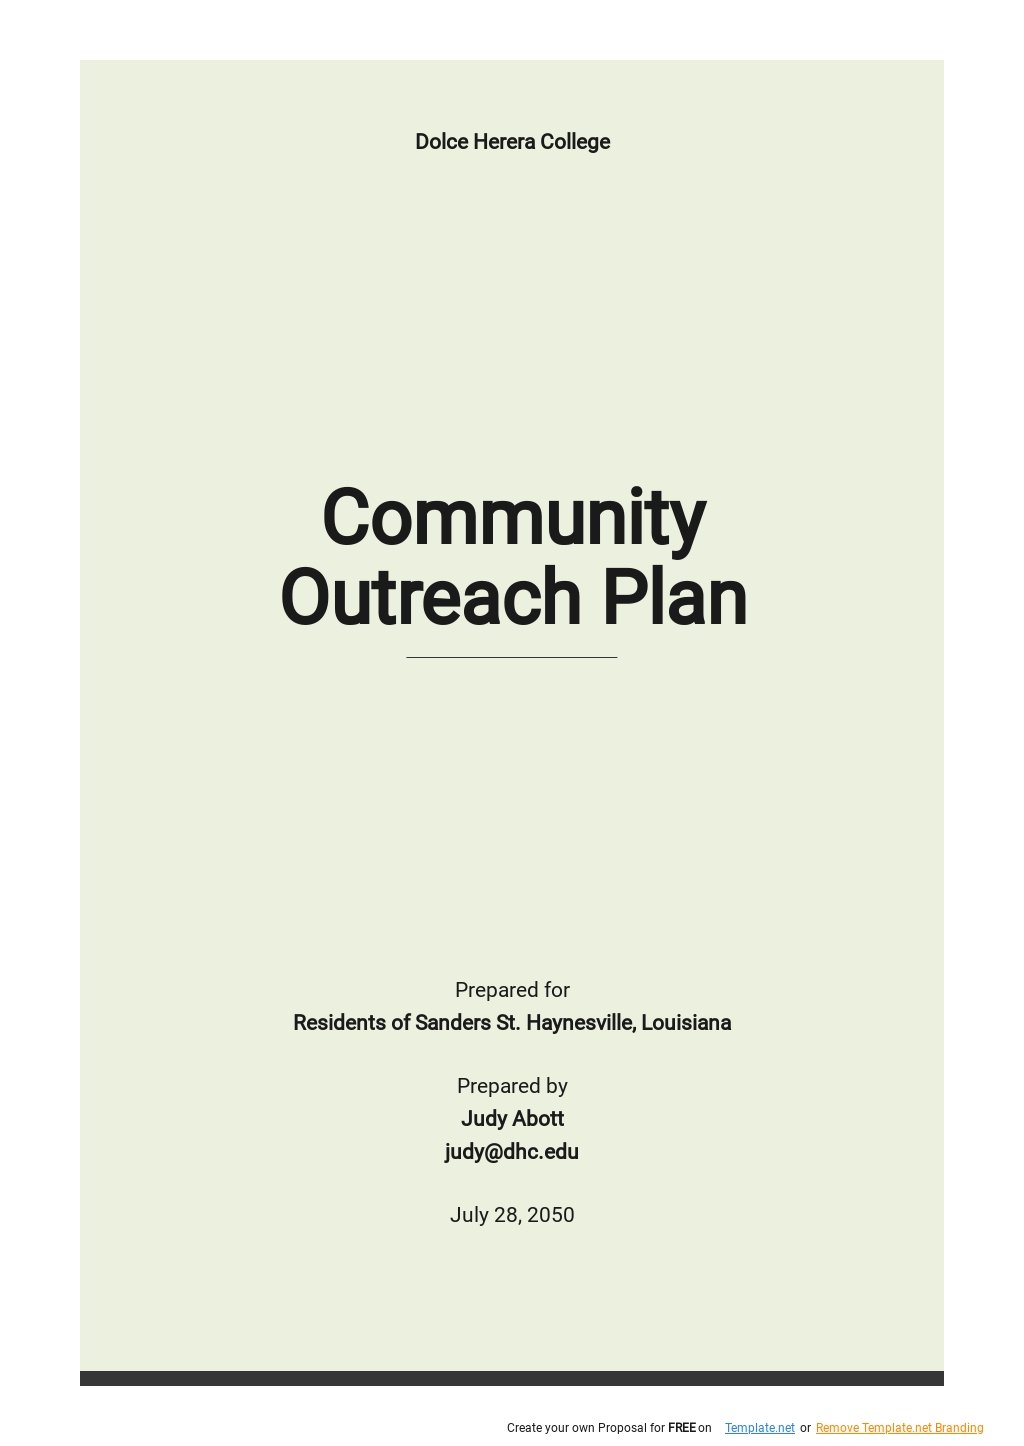 Community Outreach Plan Template Google Docs, Word, Apple Pages, PDF